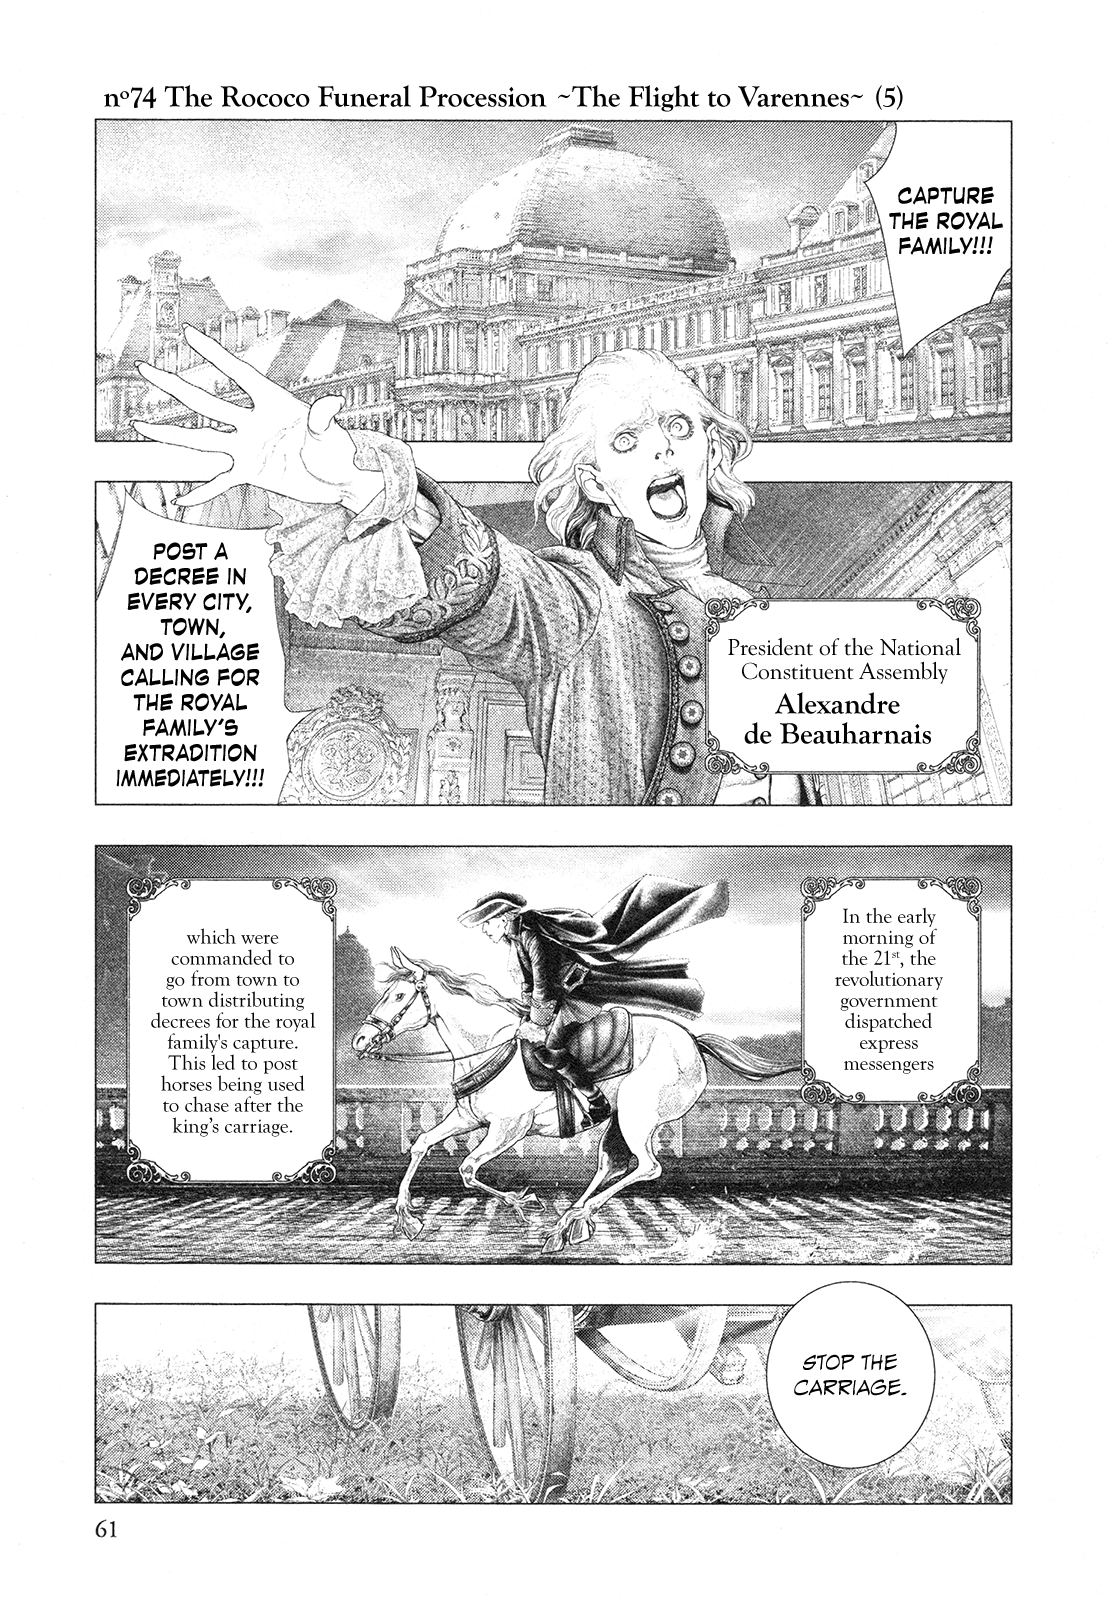 Innocent Rouge Vol.11-Chapter.74-The-Rococo-Funeral-Procession-~The-Flight-to-Varennes~-(5) Image